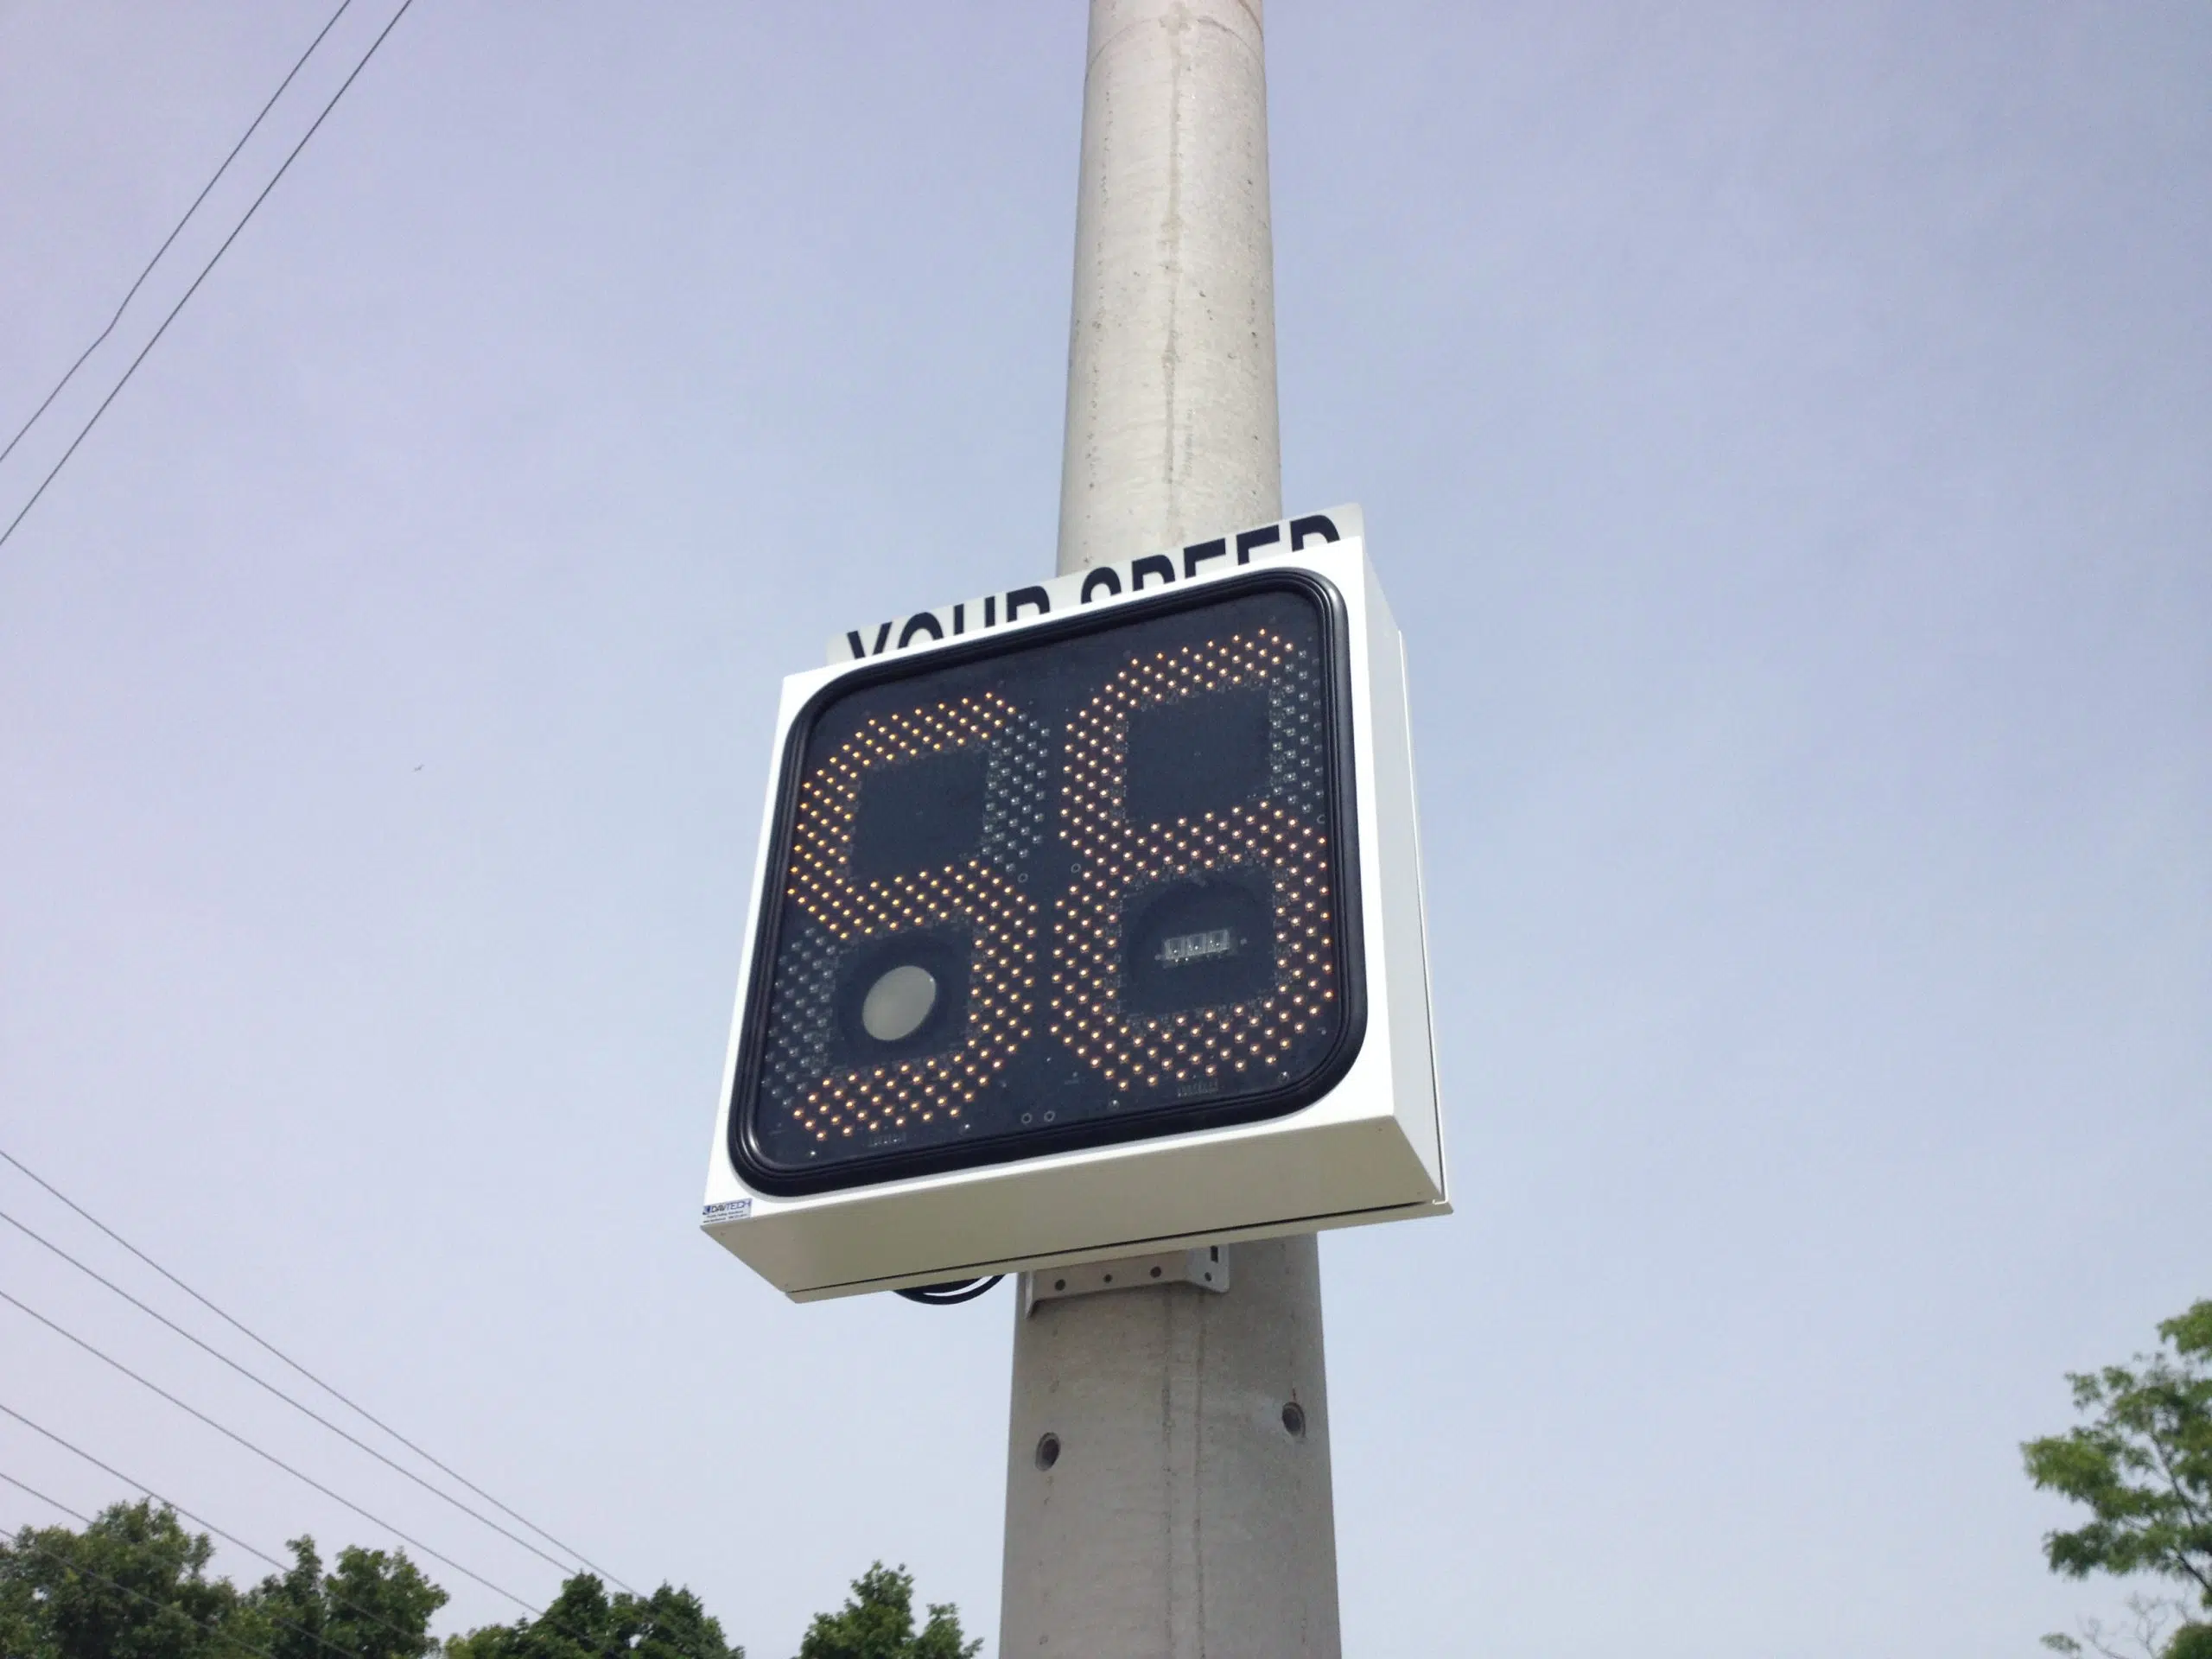 Digital signs used to remind drivers about PEC speed limit changes